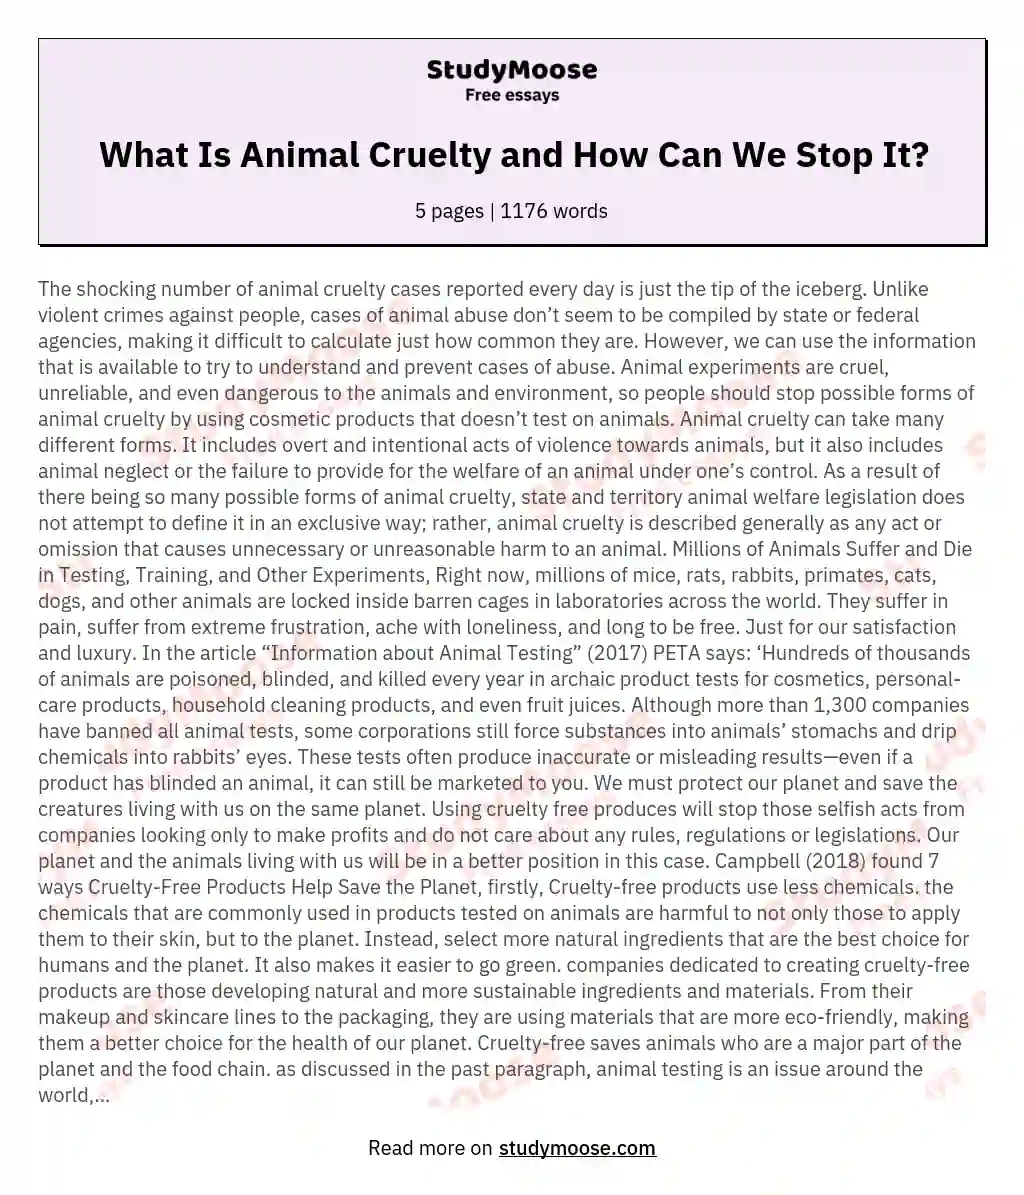 What Is Animal Cruelty and How Can We Stop It?